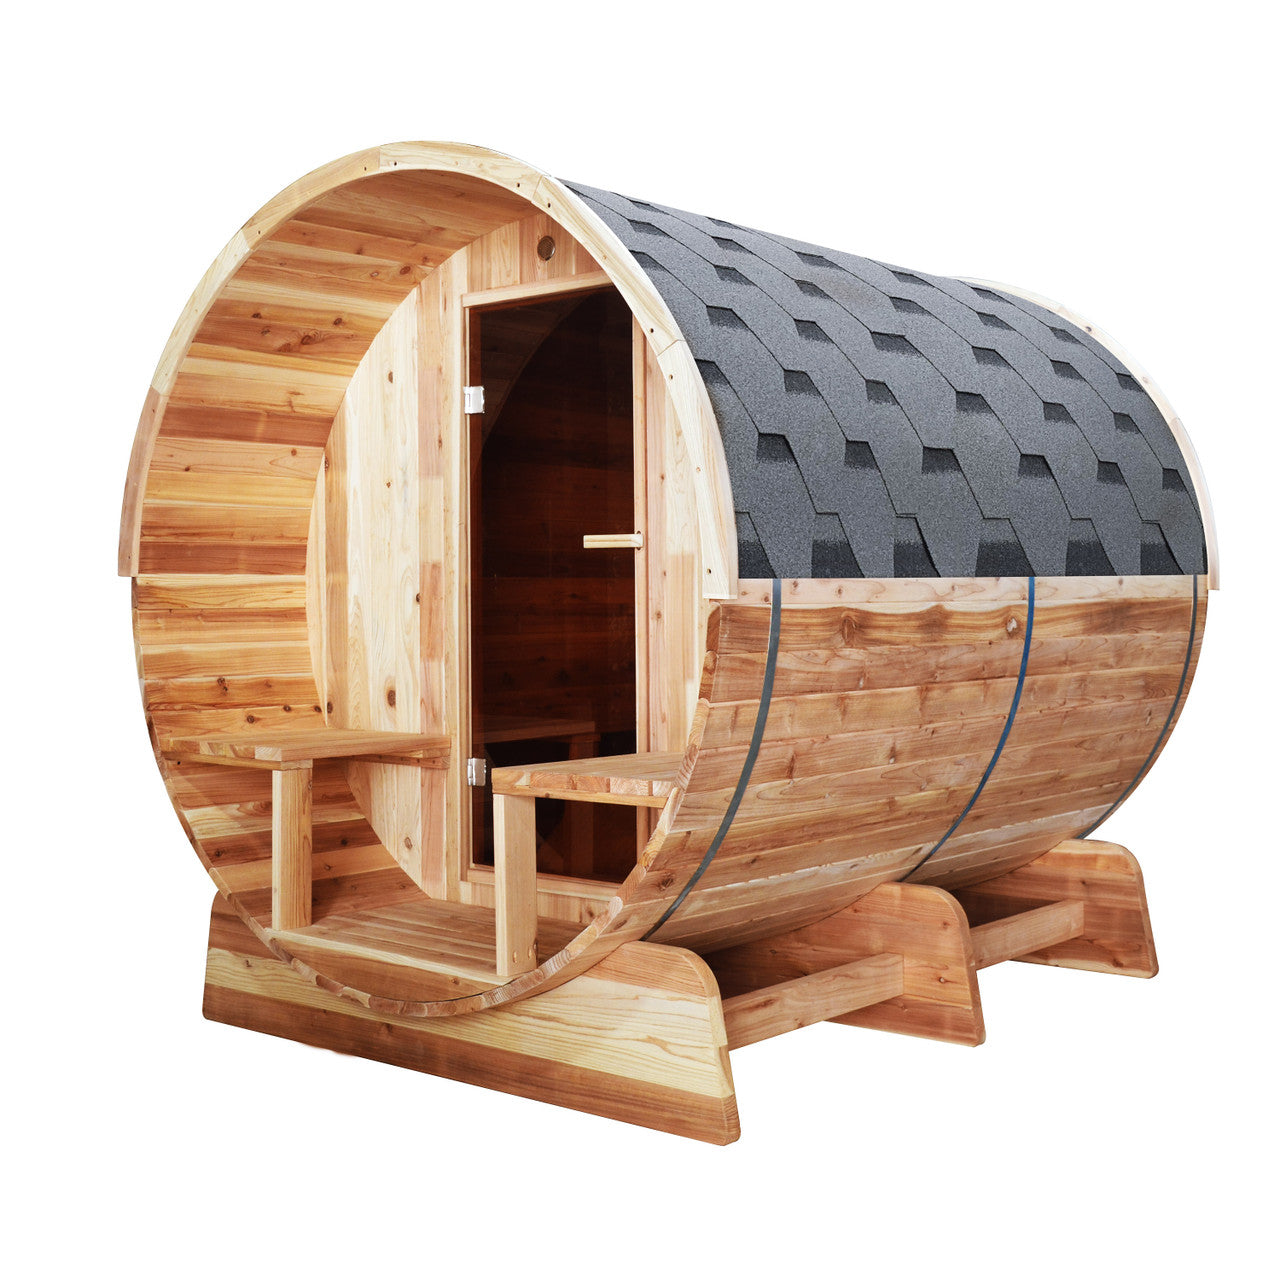 Aleko Outdoor/Indoor Red Cedar Wet/Dry Barrel Sauna - Front Porch Canopy with Panoramic View - Bitumen Shingle Roofing - 8 kW UL Certified KIP Harvia Heater - 6-8 Person SB8CEDARCP-AP - Serenity Provision